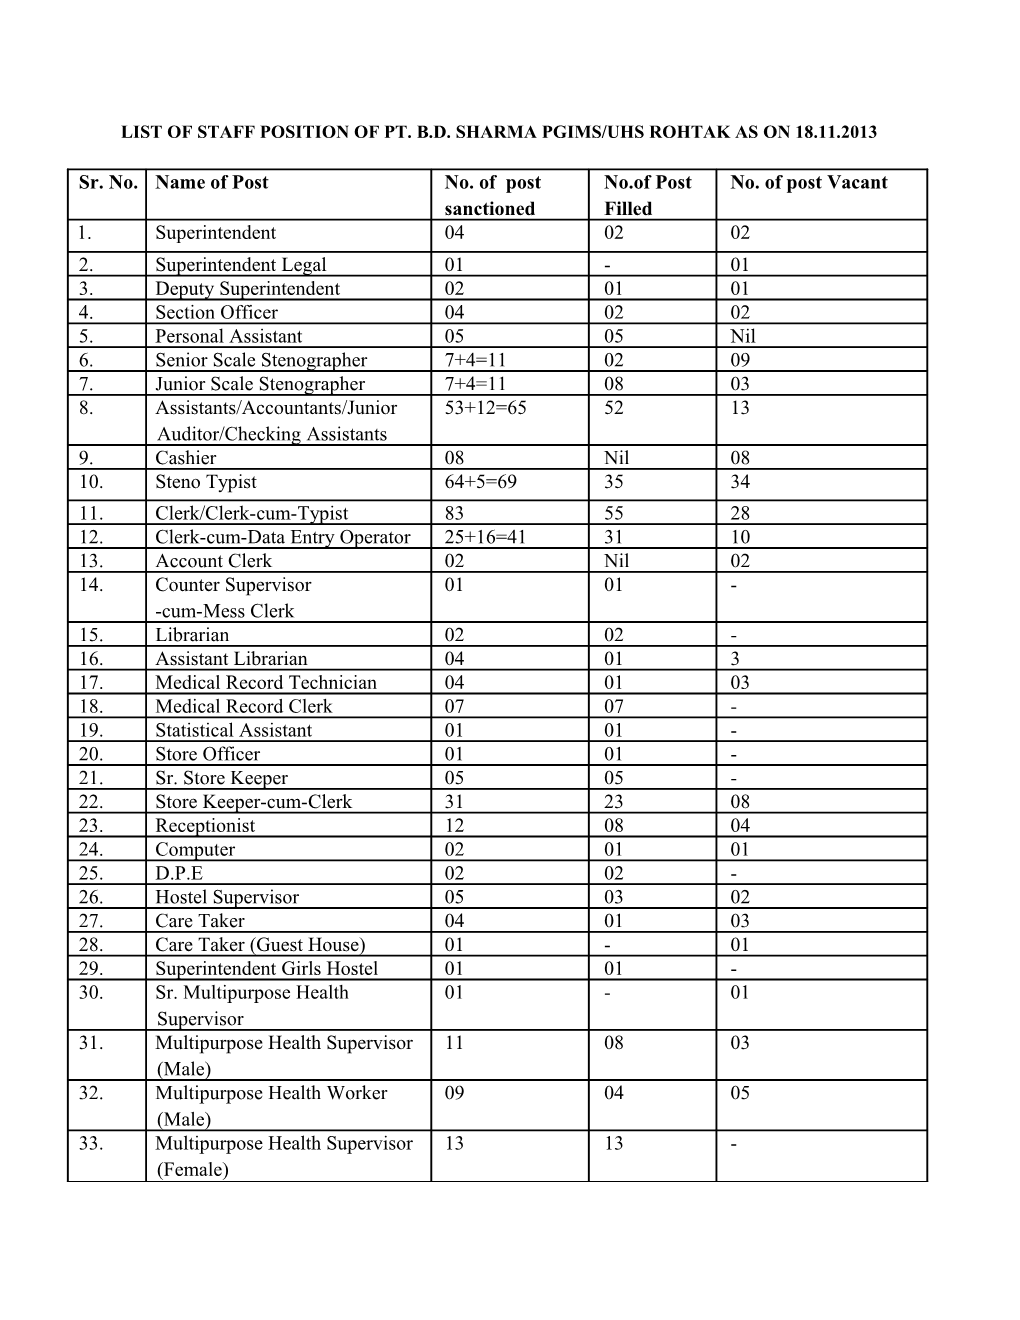 List of Staff Position of Pt. B.D. Sharma Pgims/Uhs Rohtak As on 18.11.2013